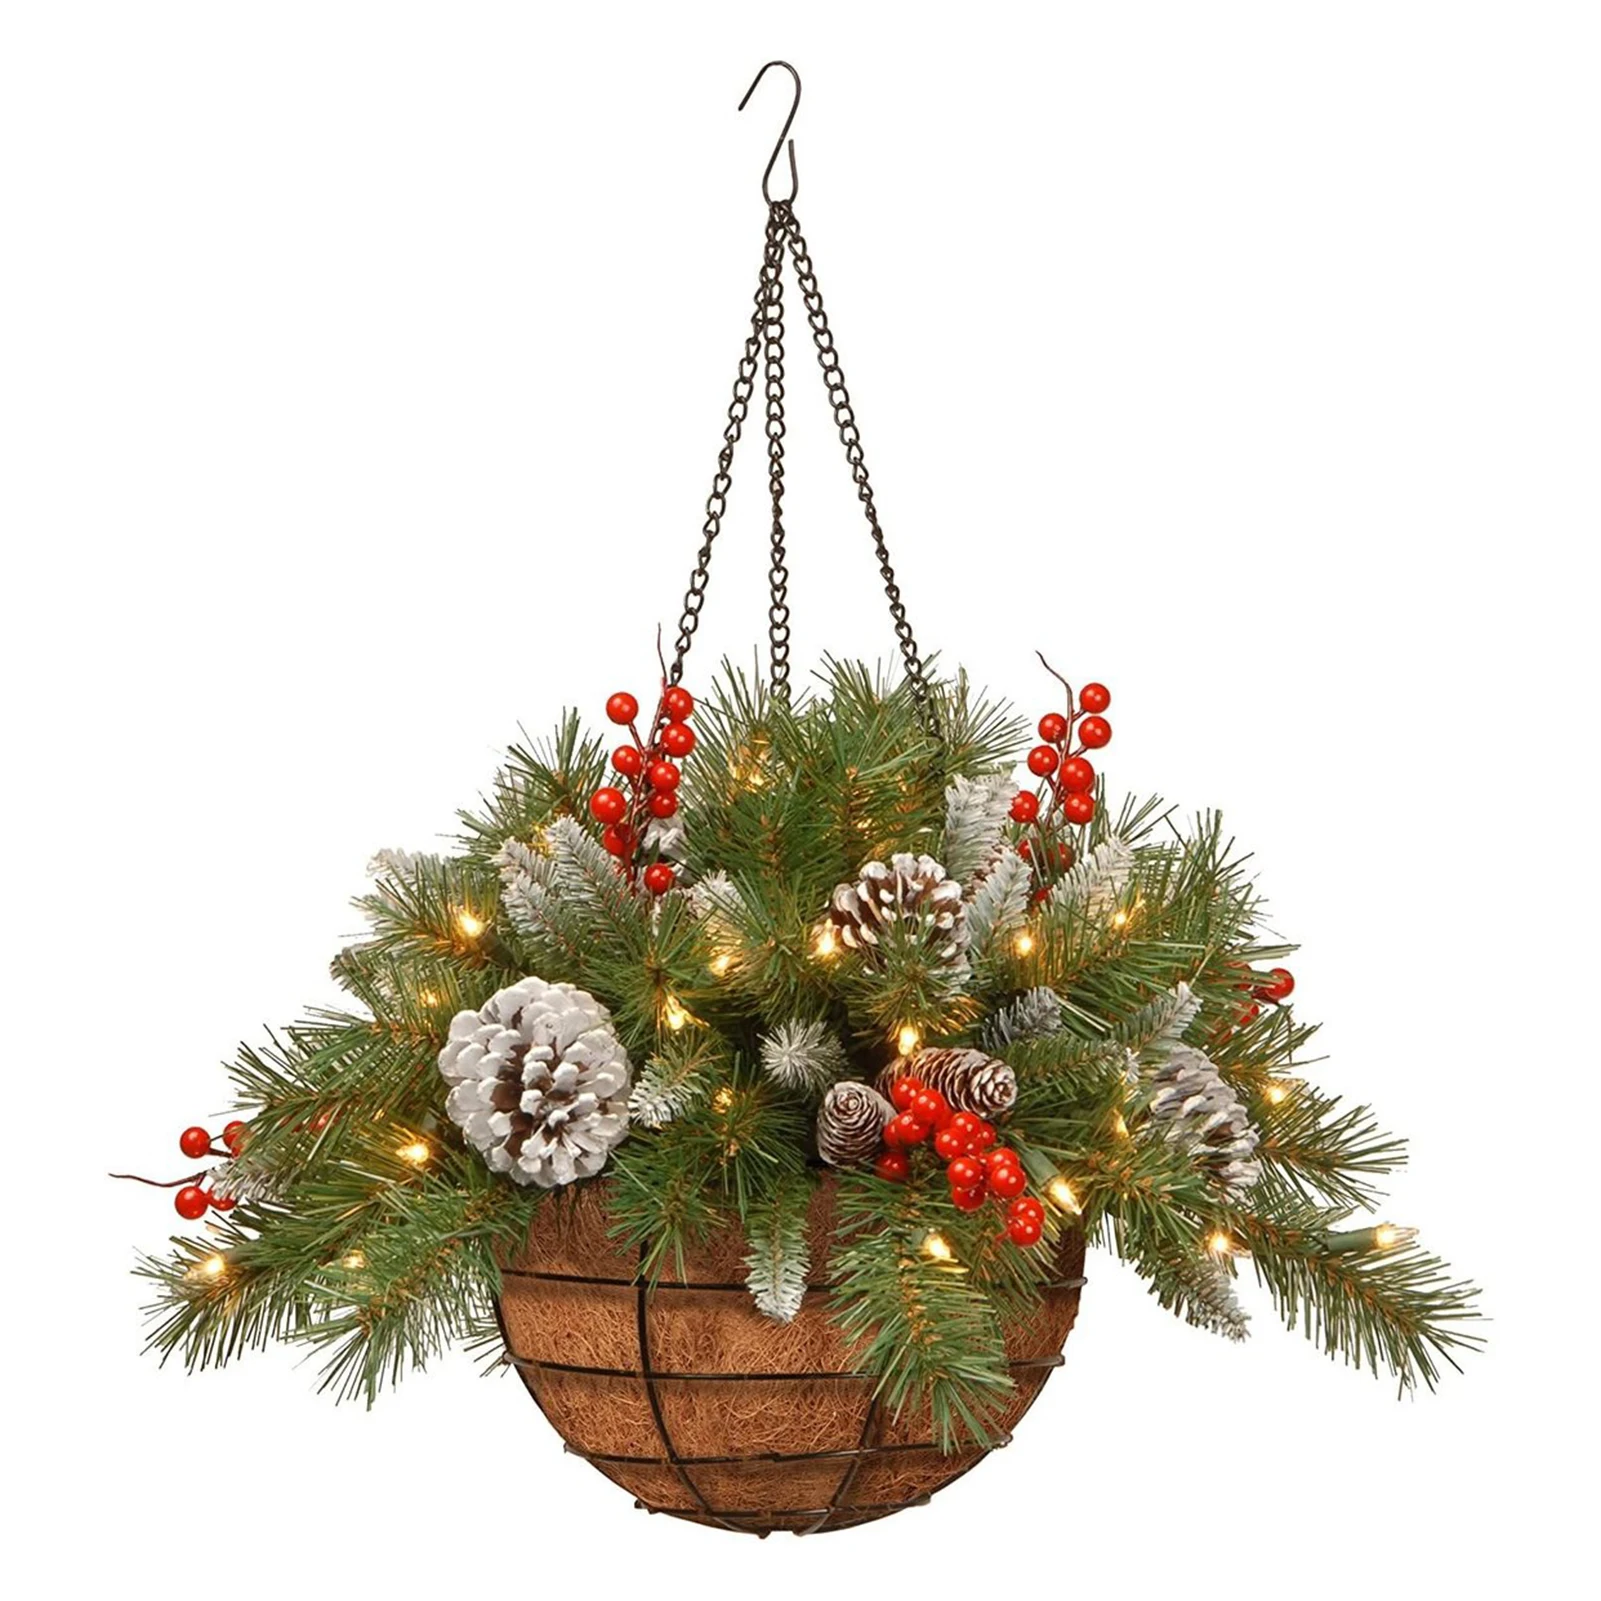 Artificial Christmas Hanging Basket Flocked With Mixed Decorations And White LED Lights Hanging Ornament Xmas Decor